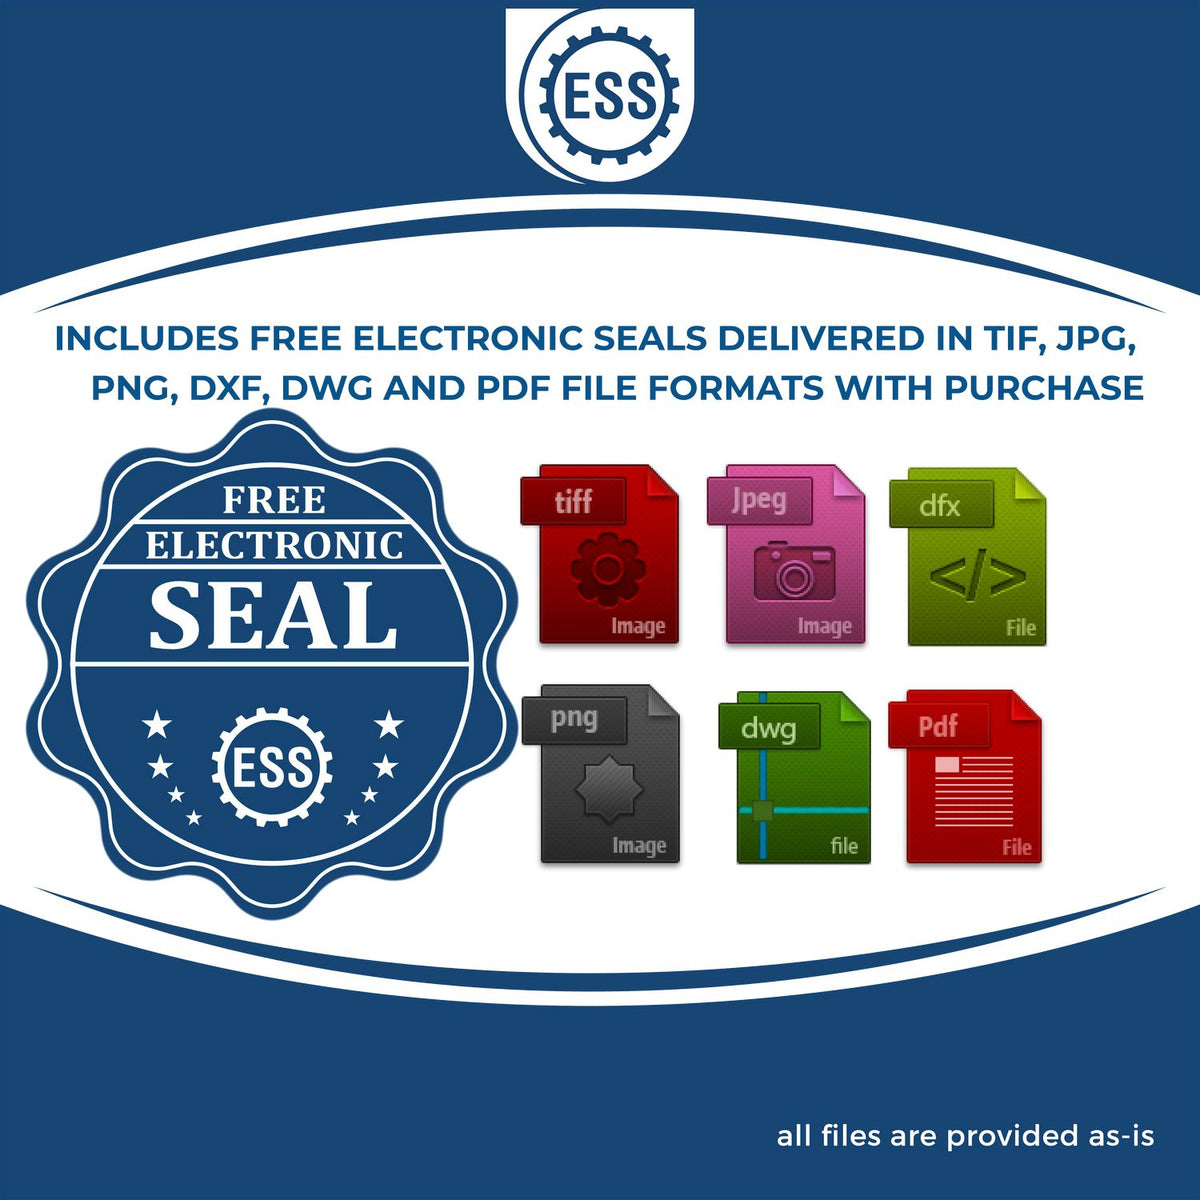 An infographic for the free electronic seal for the Handheld Massachusetts Professional Geologist Embosser illustrating the different file type icons such as DXF, DWG, TIF, JPG and PNG.